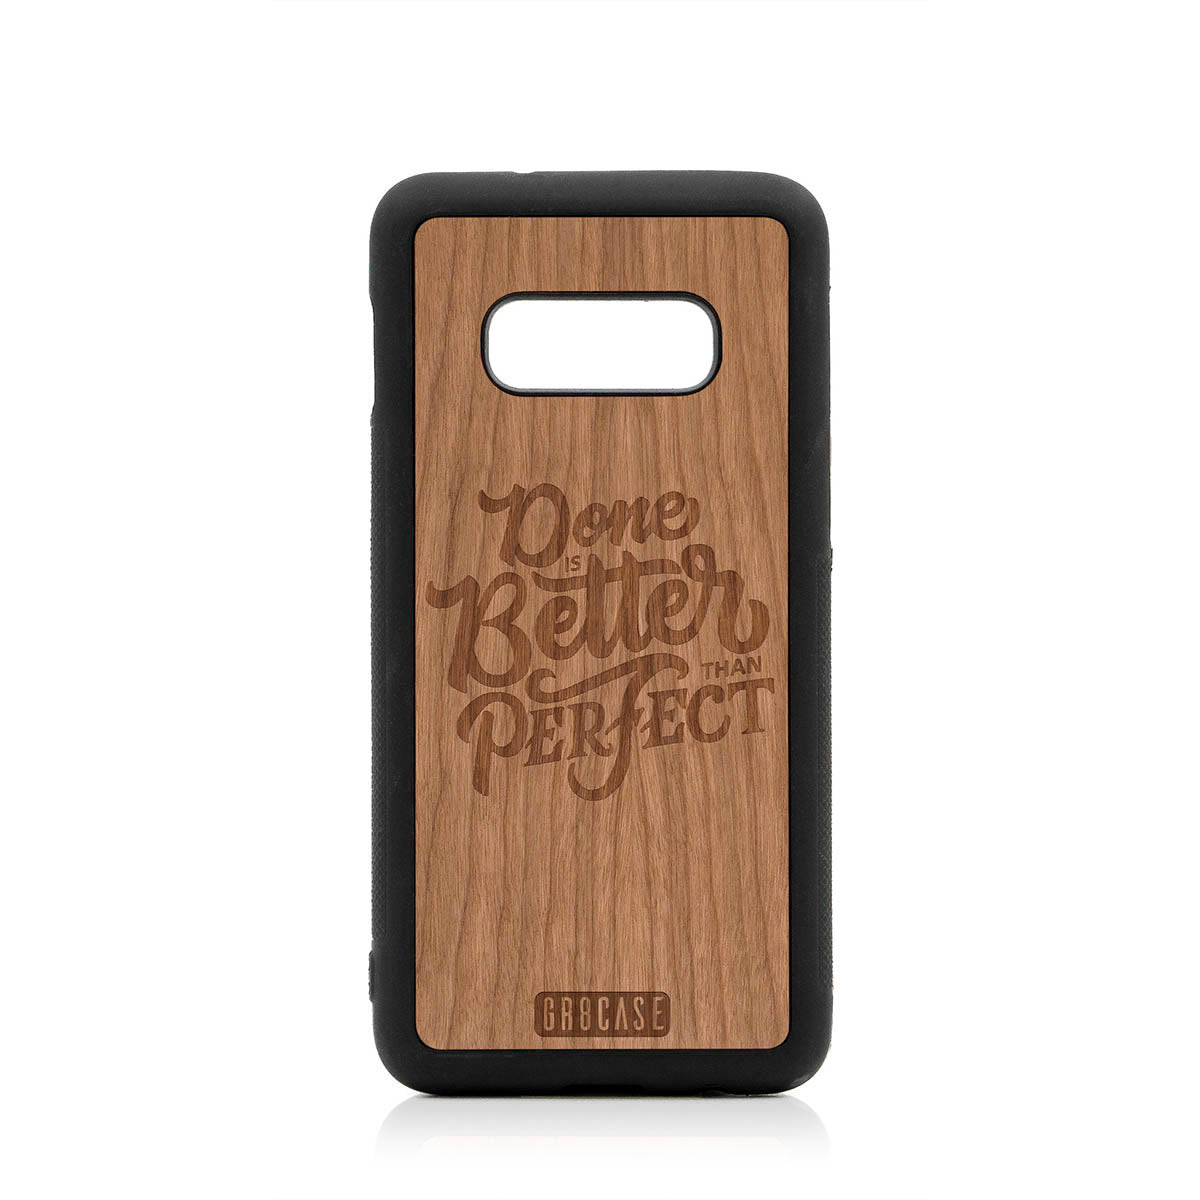 Done Is Better Than Perfect Design Wood Case For Samsung Galaxy S10E by GR8CASE